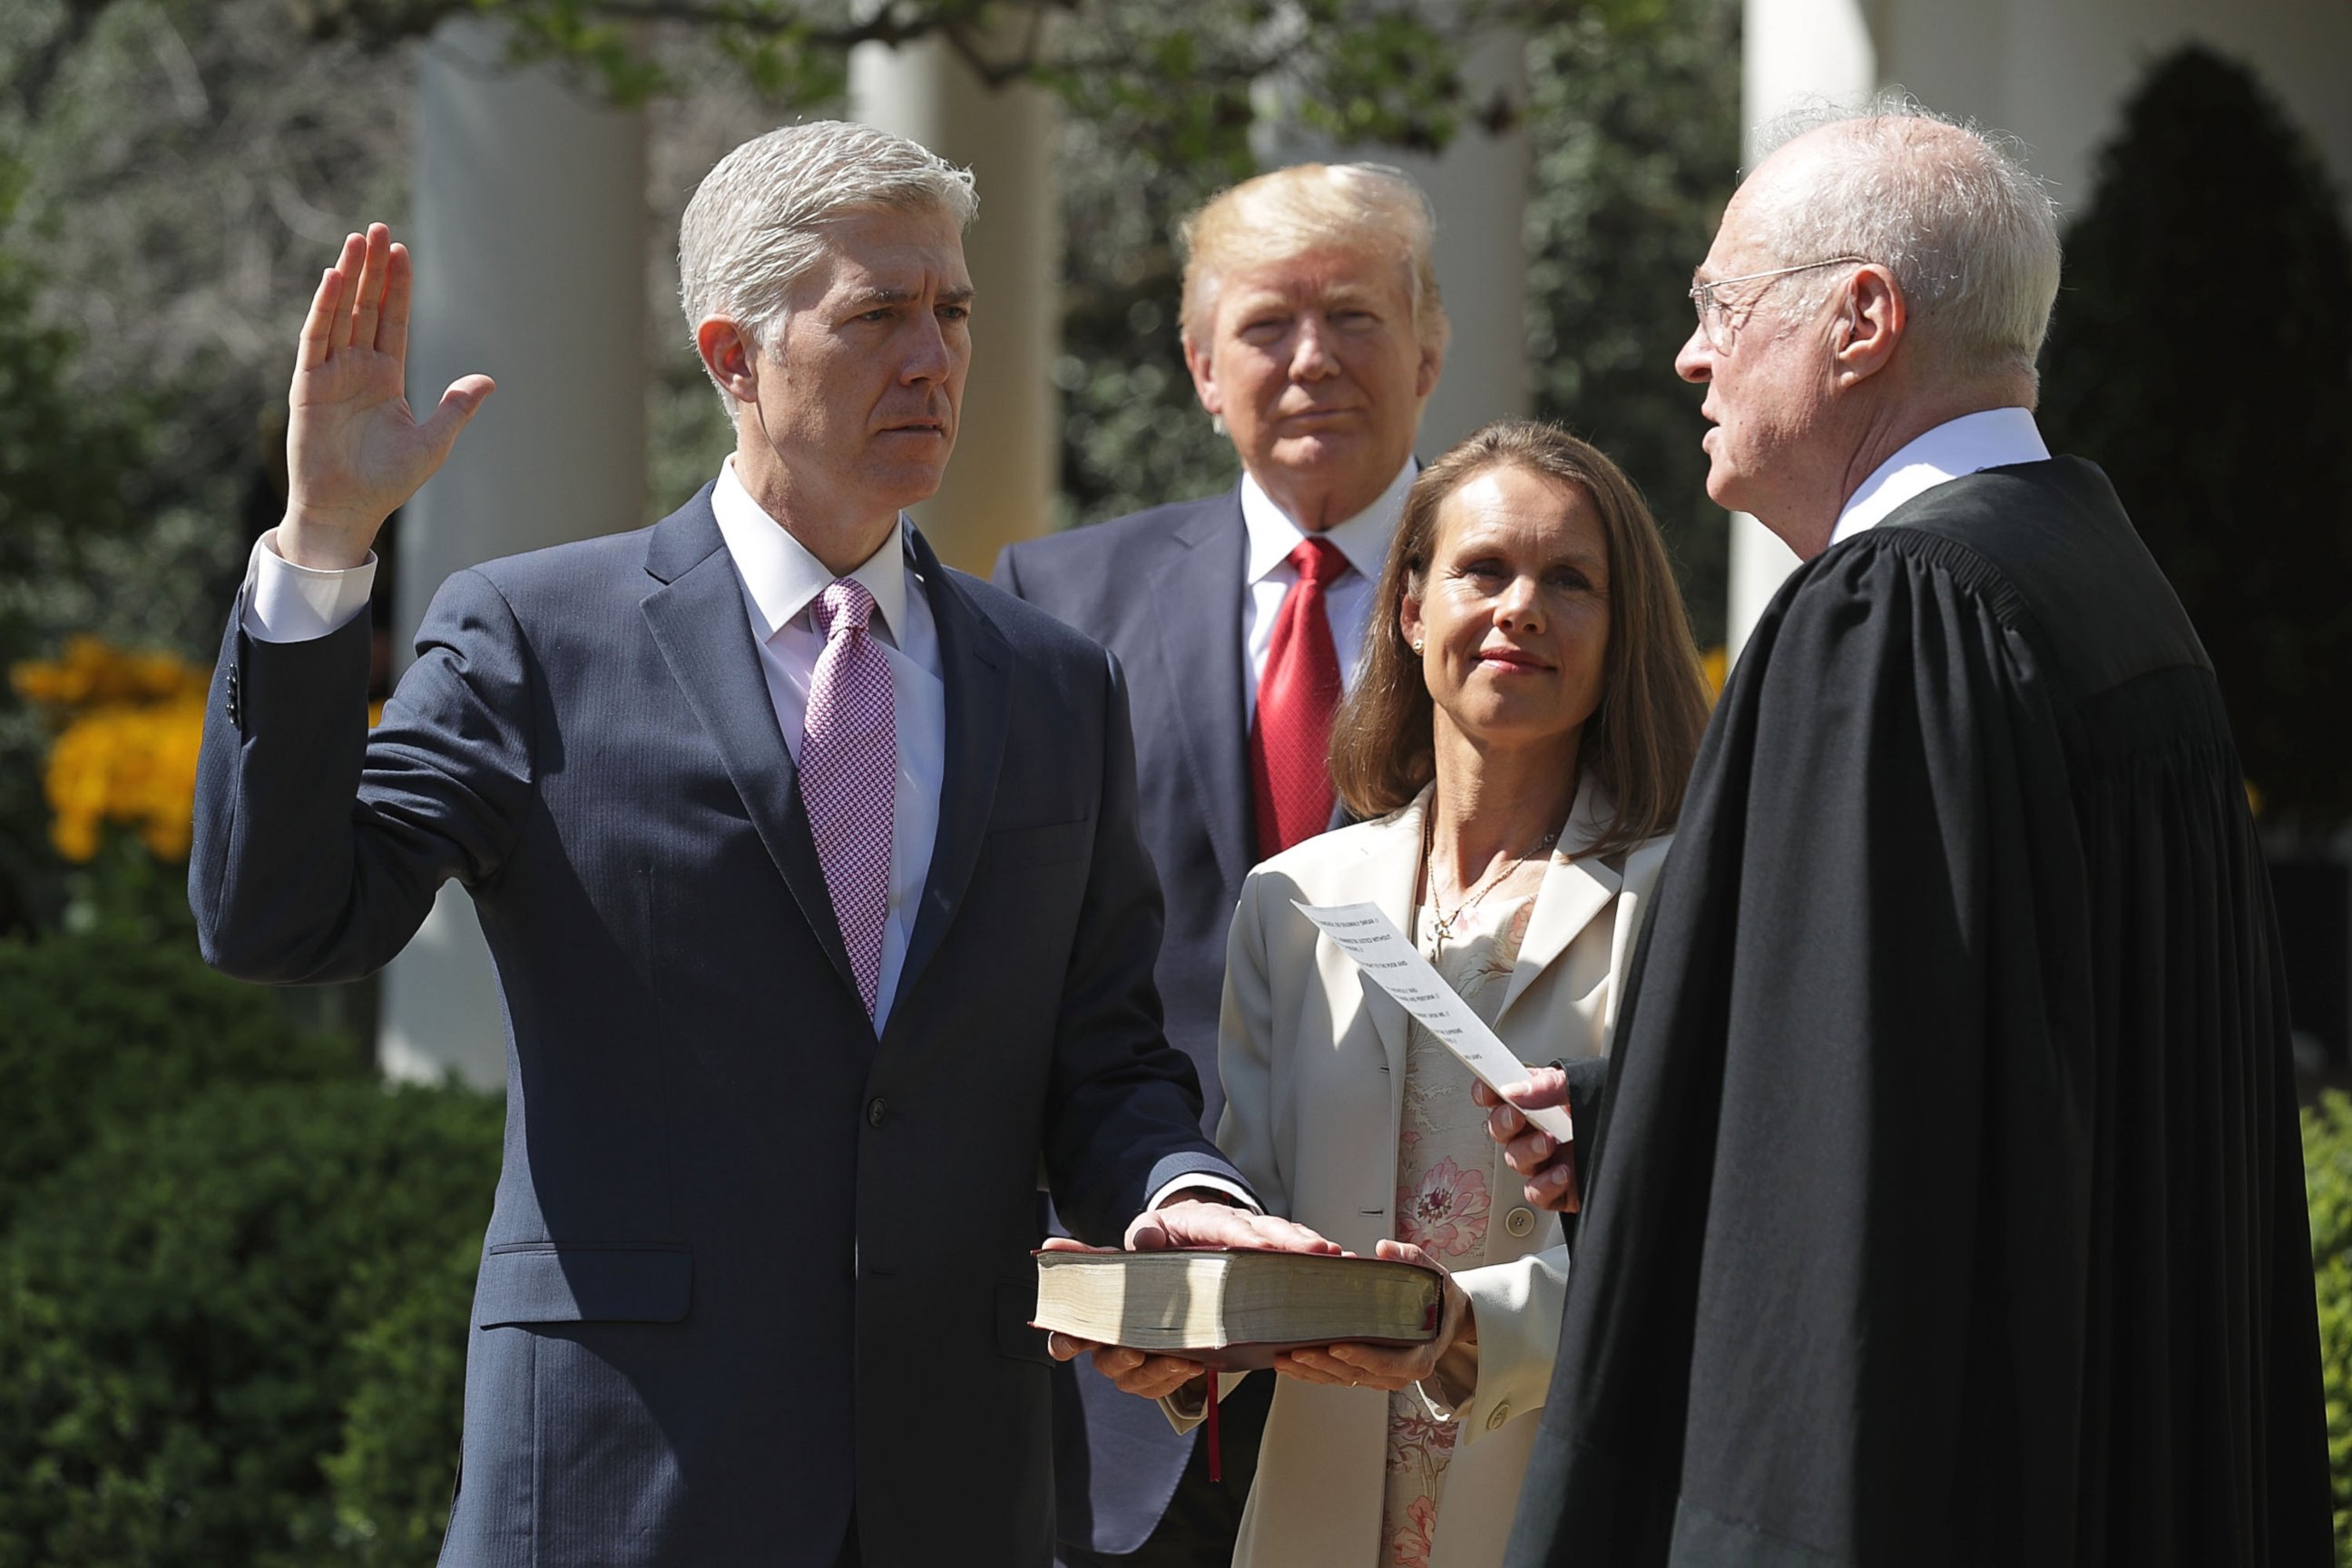 PHOTO: Supreme Court Associate Justice Anthony Kennedy administers the judicial oath to Judge Neil Gorsuch as President Donald Trump looks on during a ceremony in the Rose Garden at the White House April 10, 2017 in Washington.